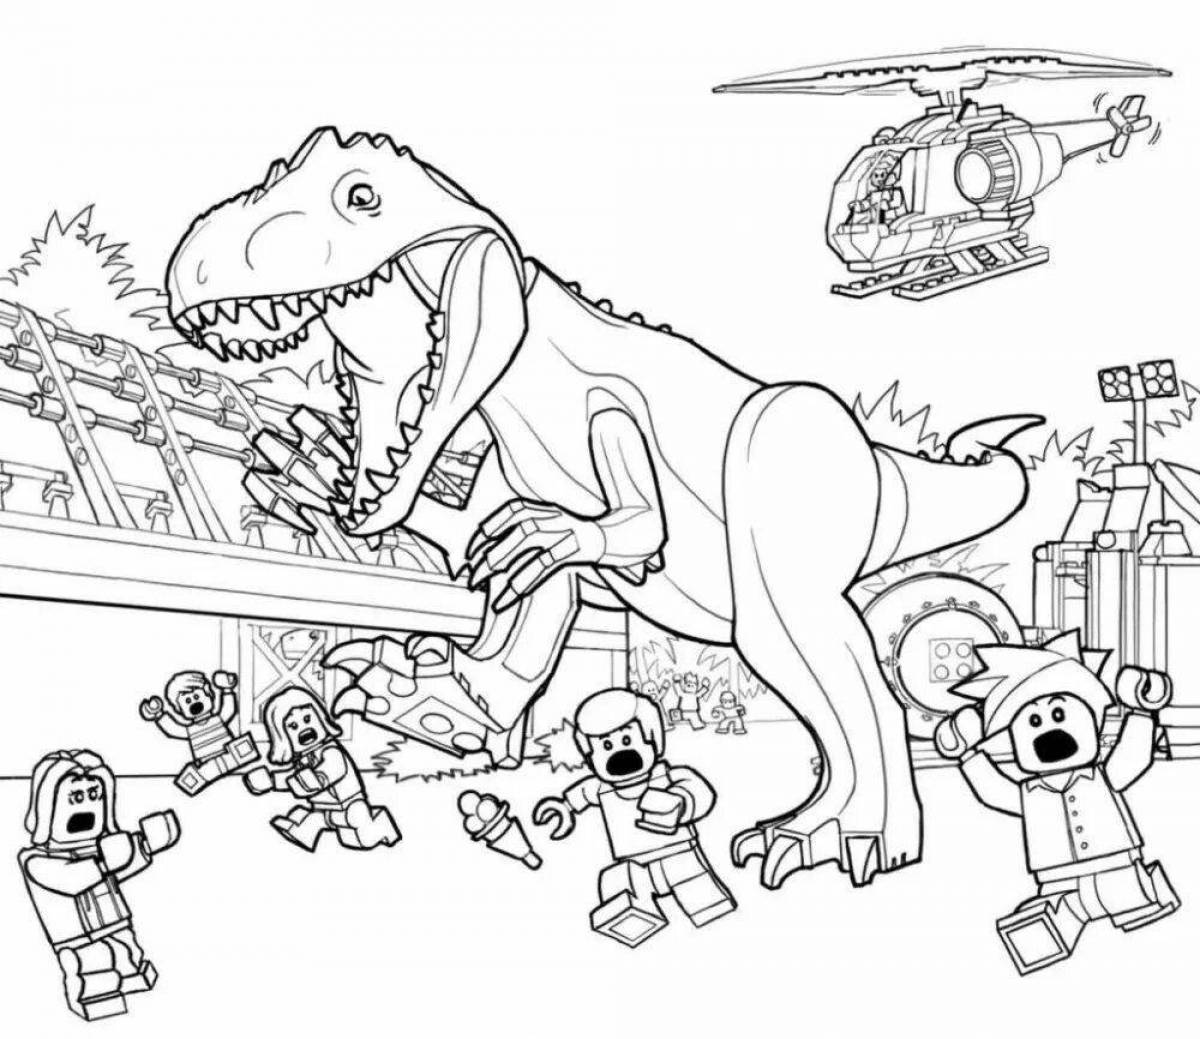 Radiant lego dinosaurs jurassic world coloring page